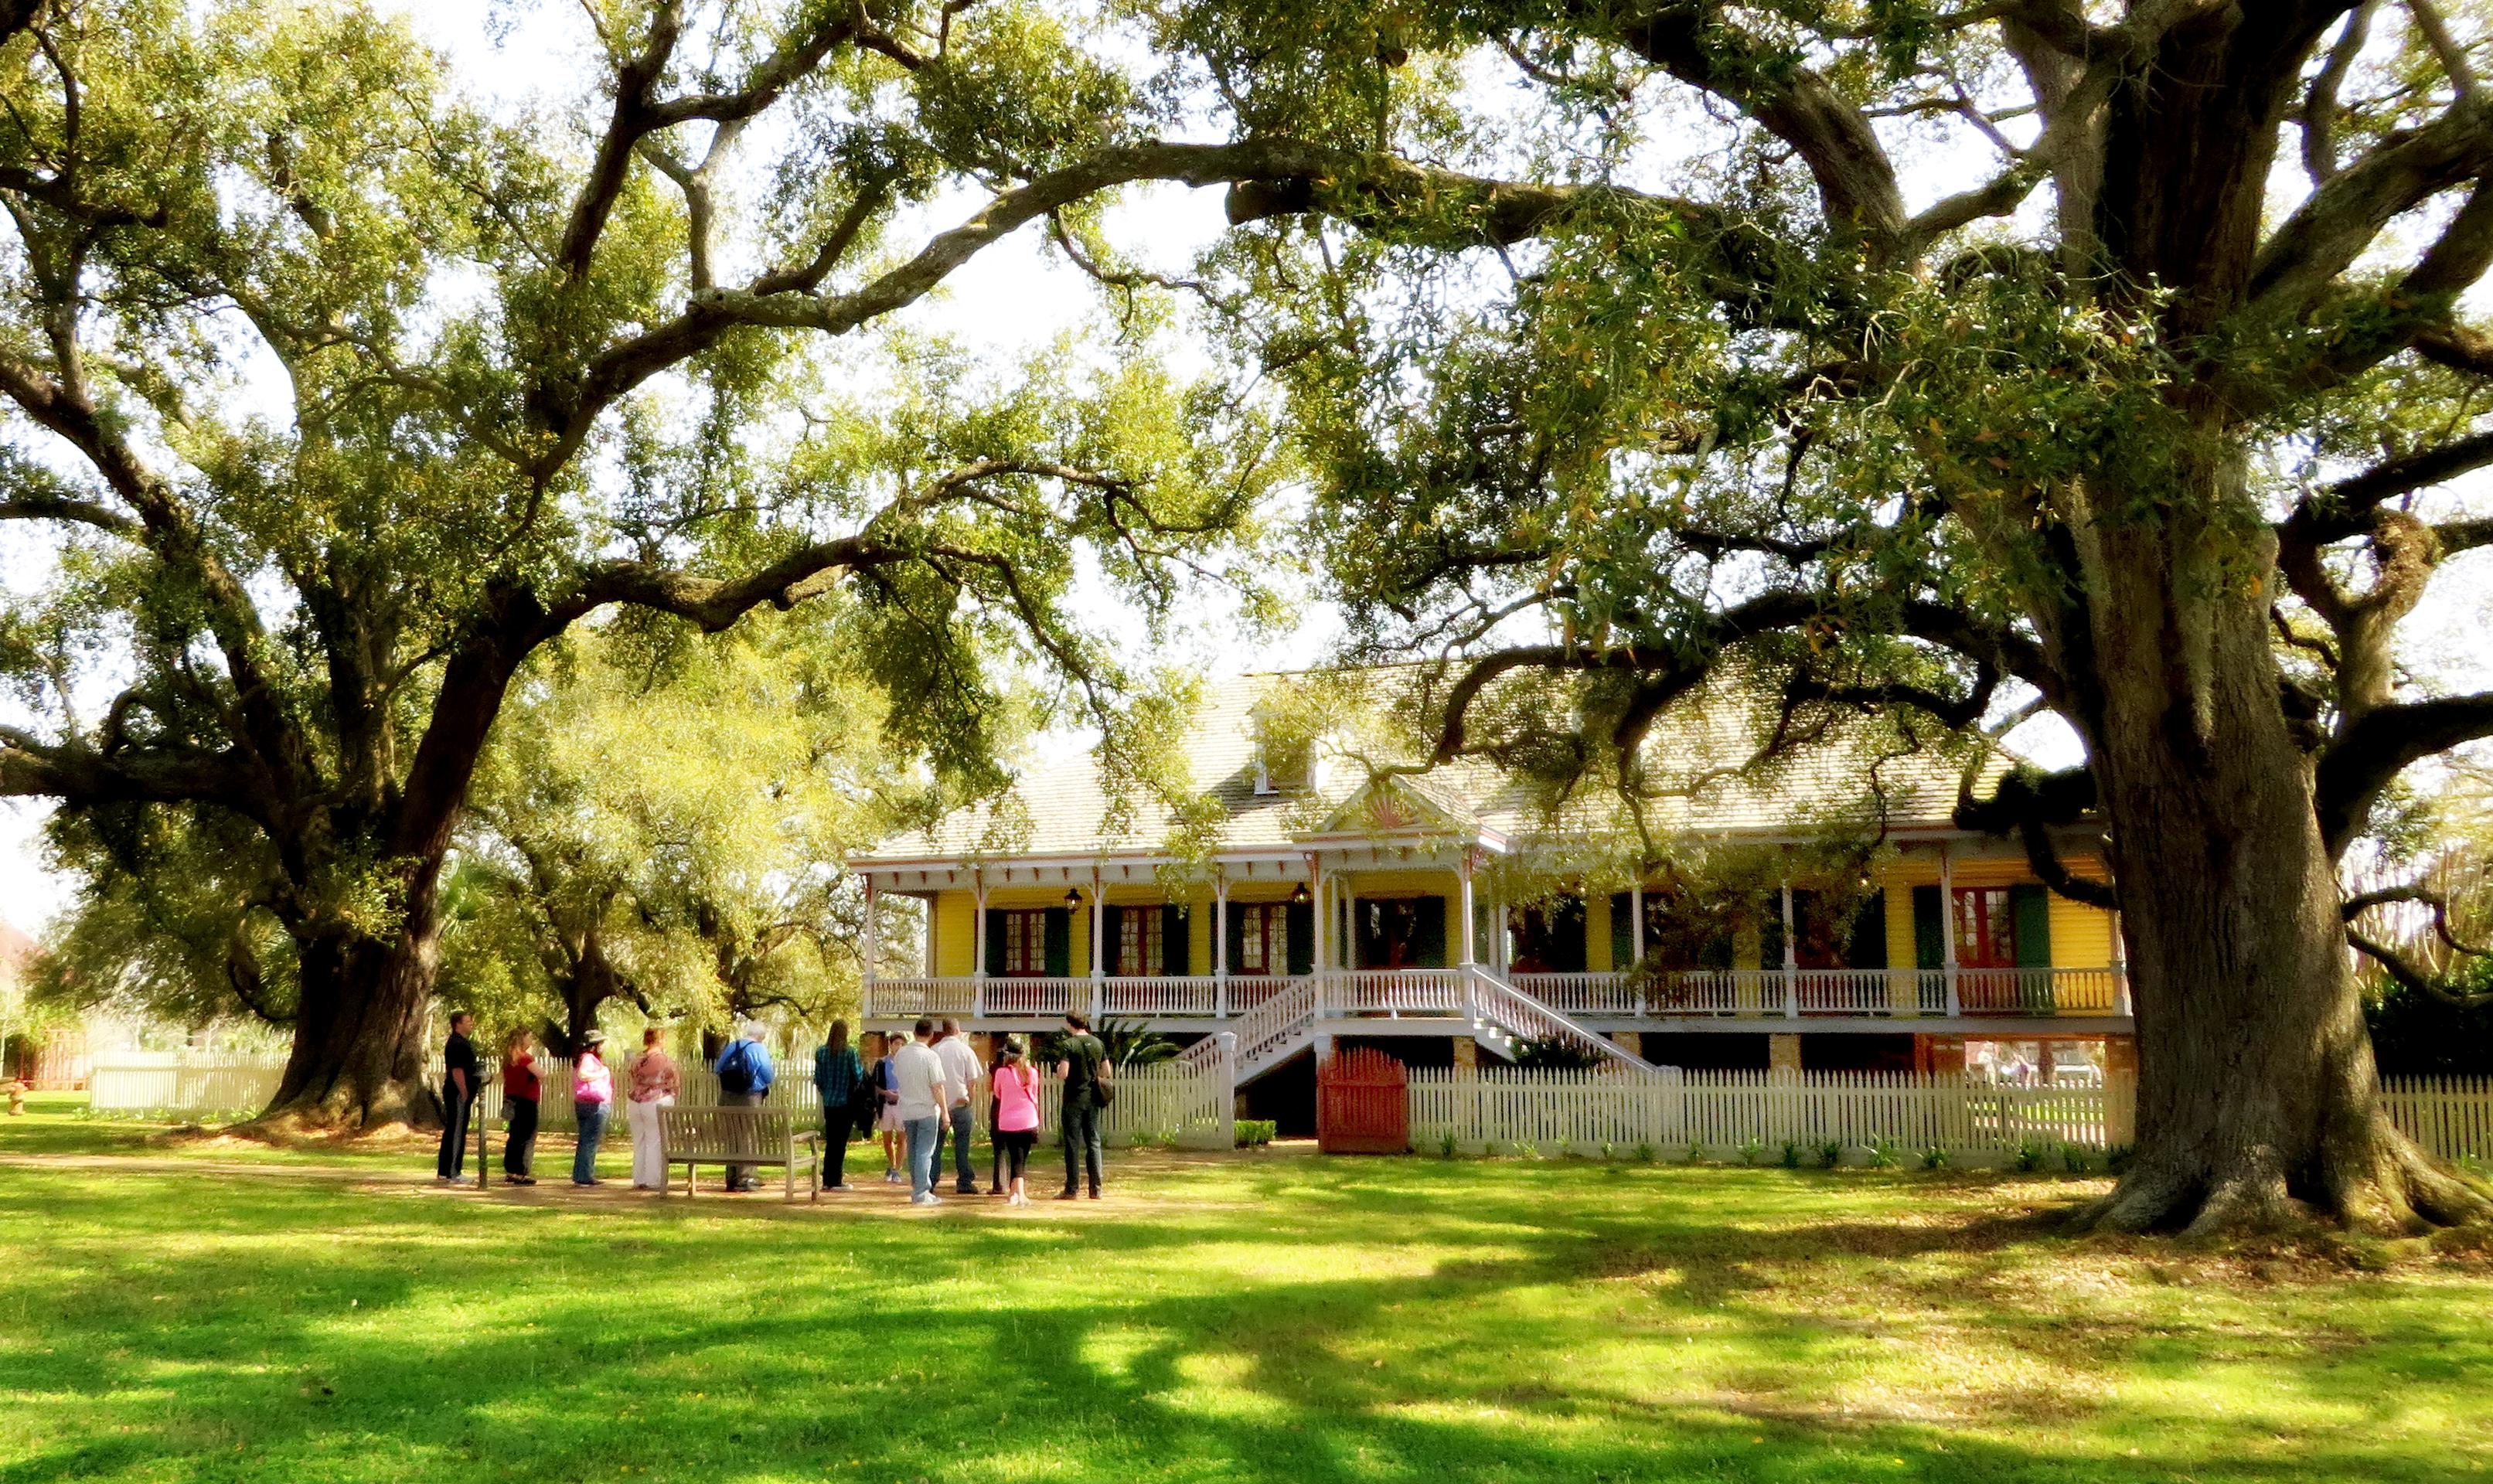 Guided Plantation Tour: Laura, Oak Alley or Whitney (Choice of 2) – Departing from New Orleans